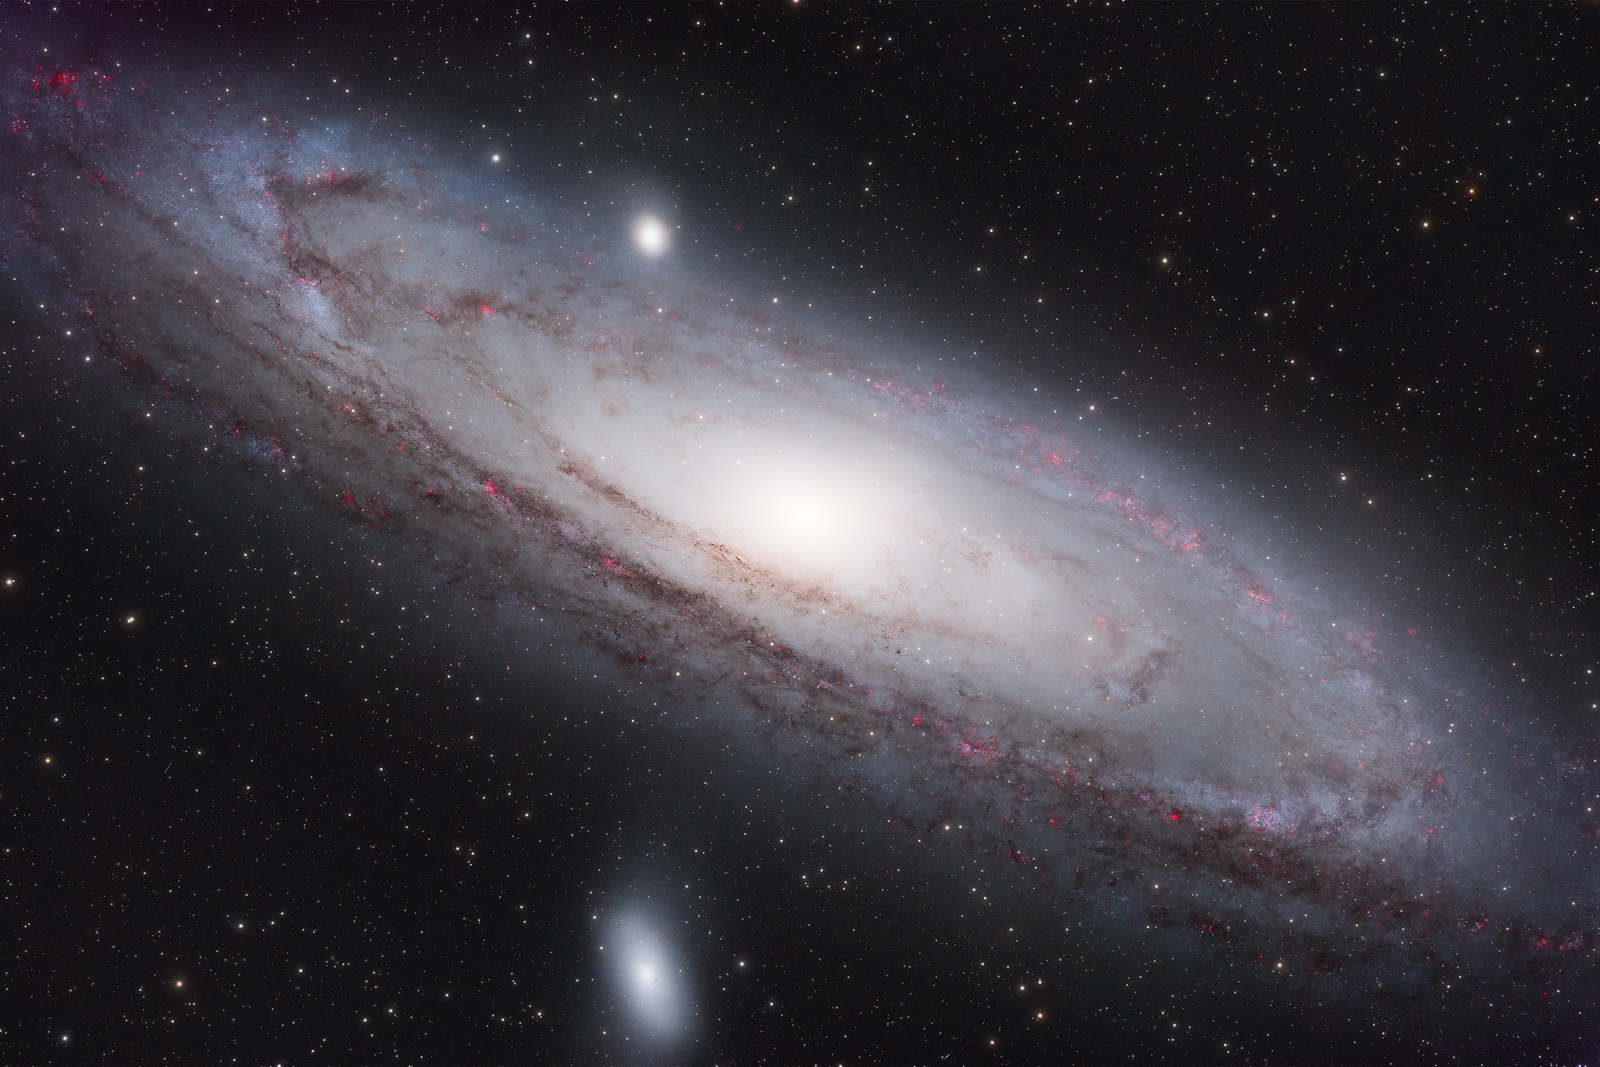 The Andromeda Galaxy (M31) is the closest neighbor to our Milky Way Galaxy.